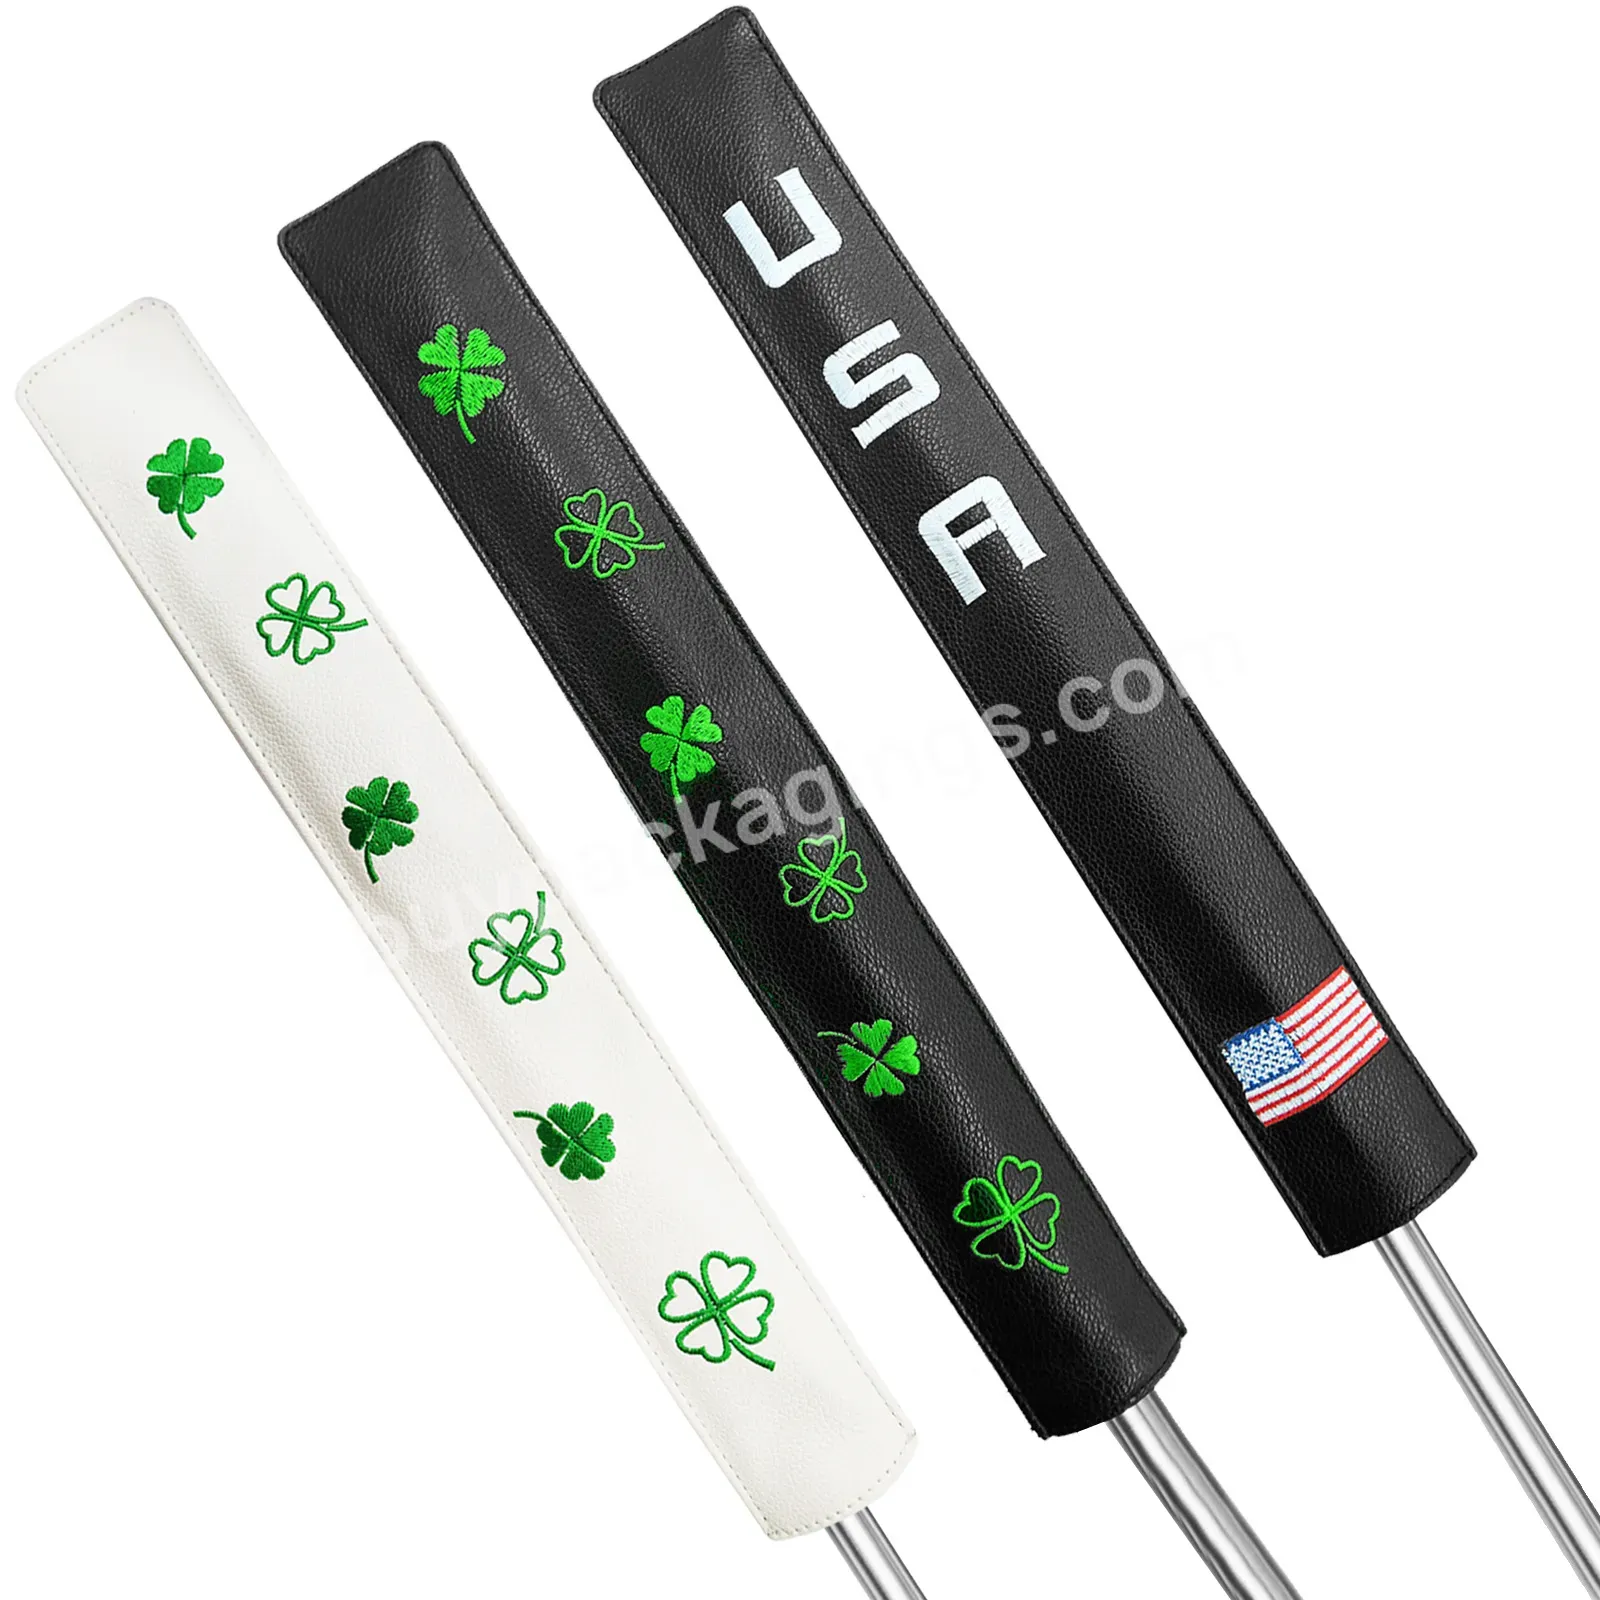 Reusable Golf Indicator Club Cover Pu Leather Orientation Practice Baseball Club Cover - Buy Golf Club Cover,Pu Leather,Practice Baseball Club Cover.